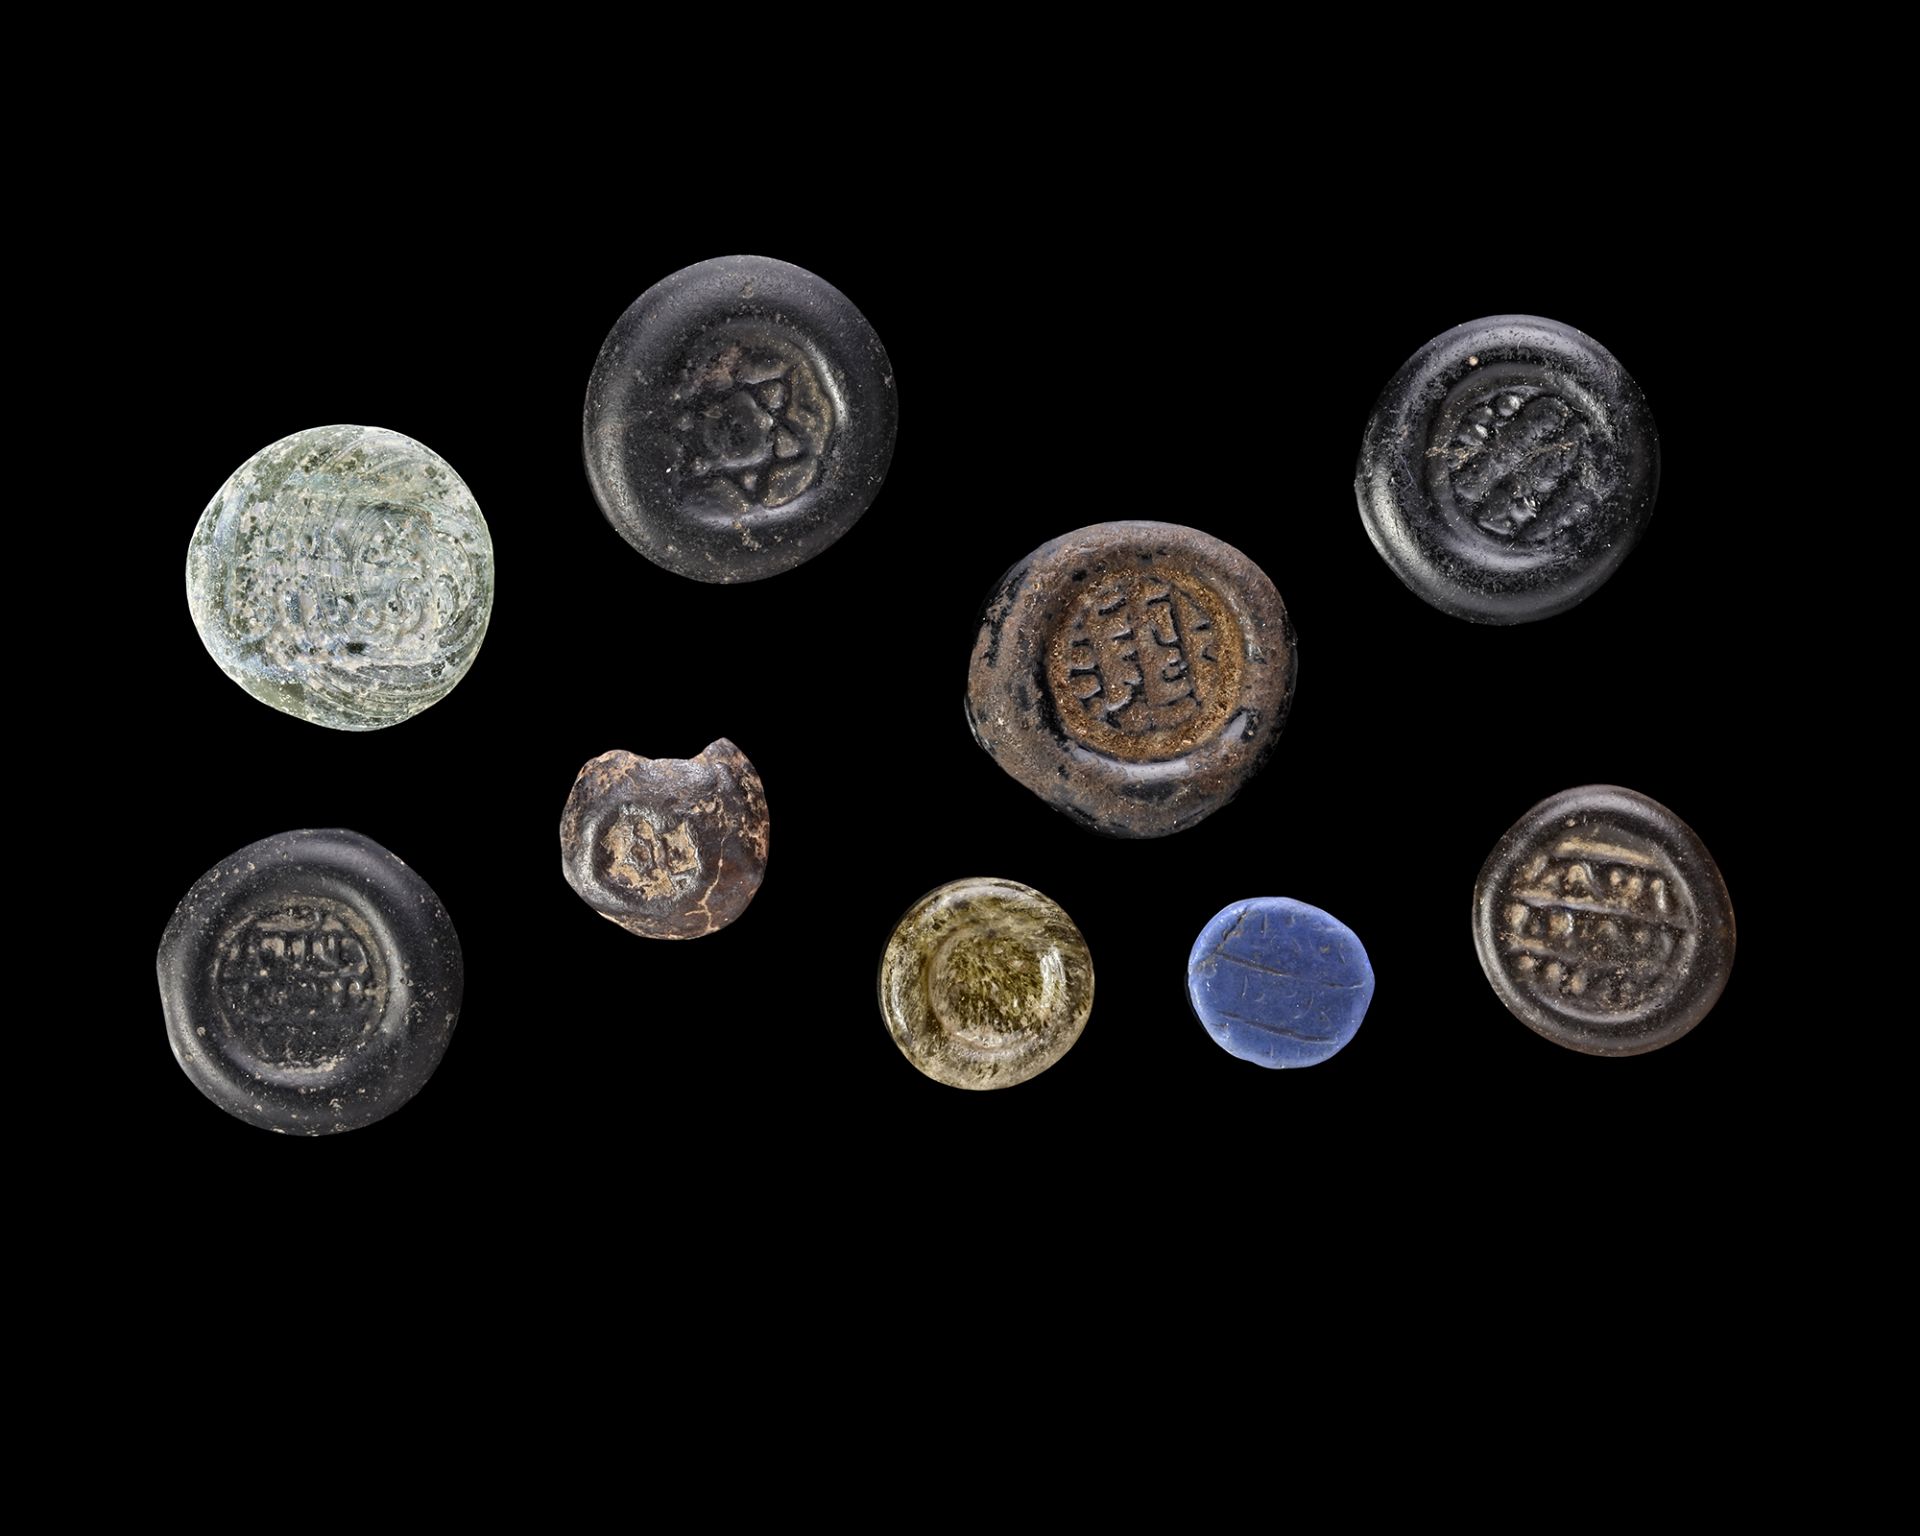 A GROUP OF NINE EARLY ISLAMIC GLASS WEIGHTS, 10TH-11TH CENTURY